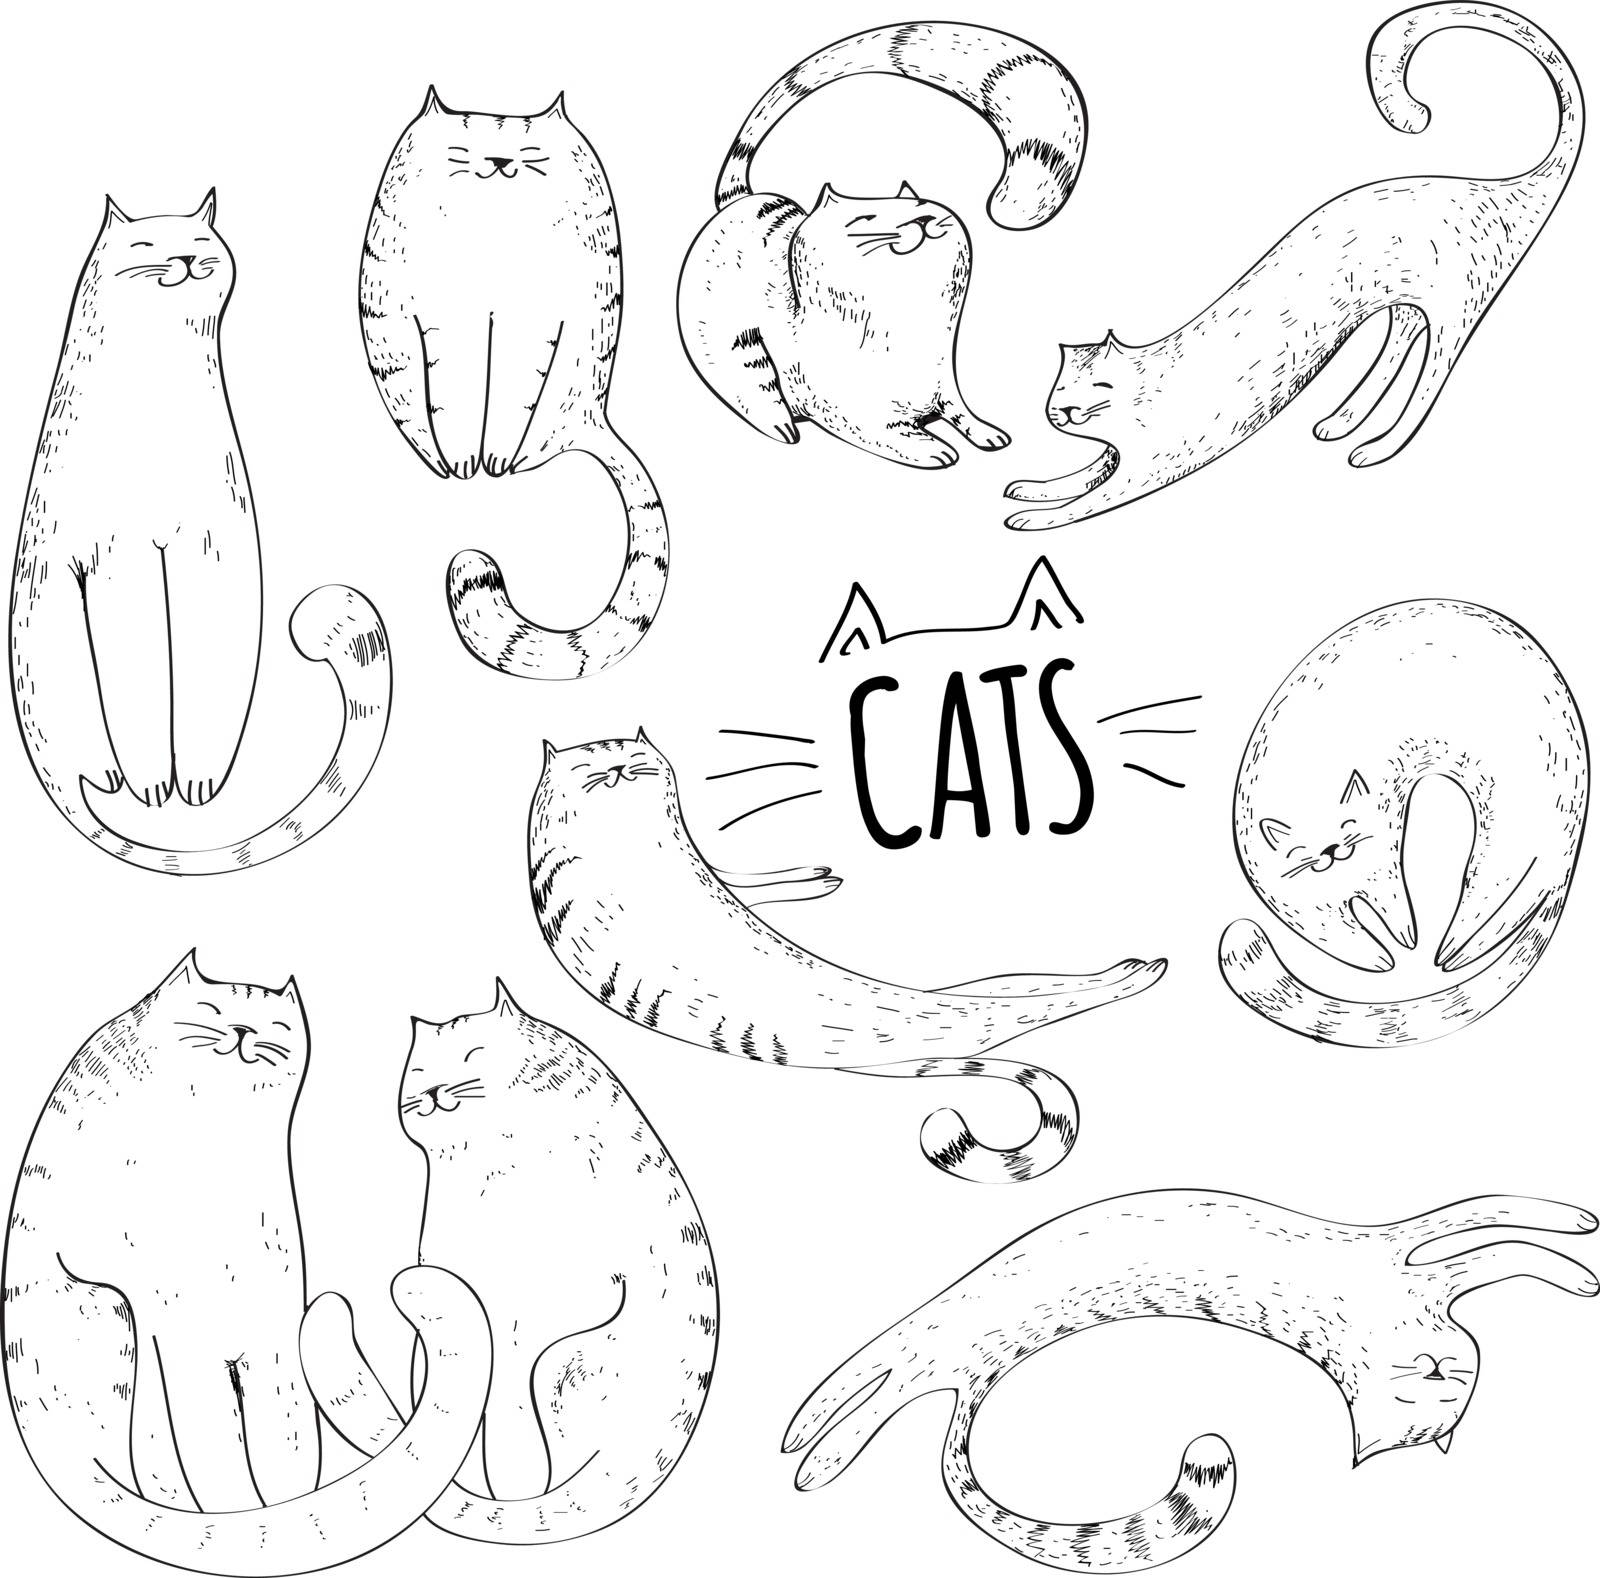 Cats collection by AlenaKaz